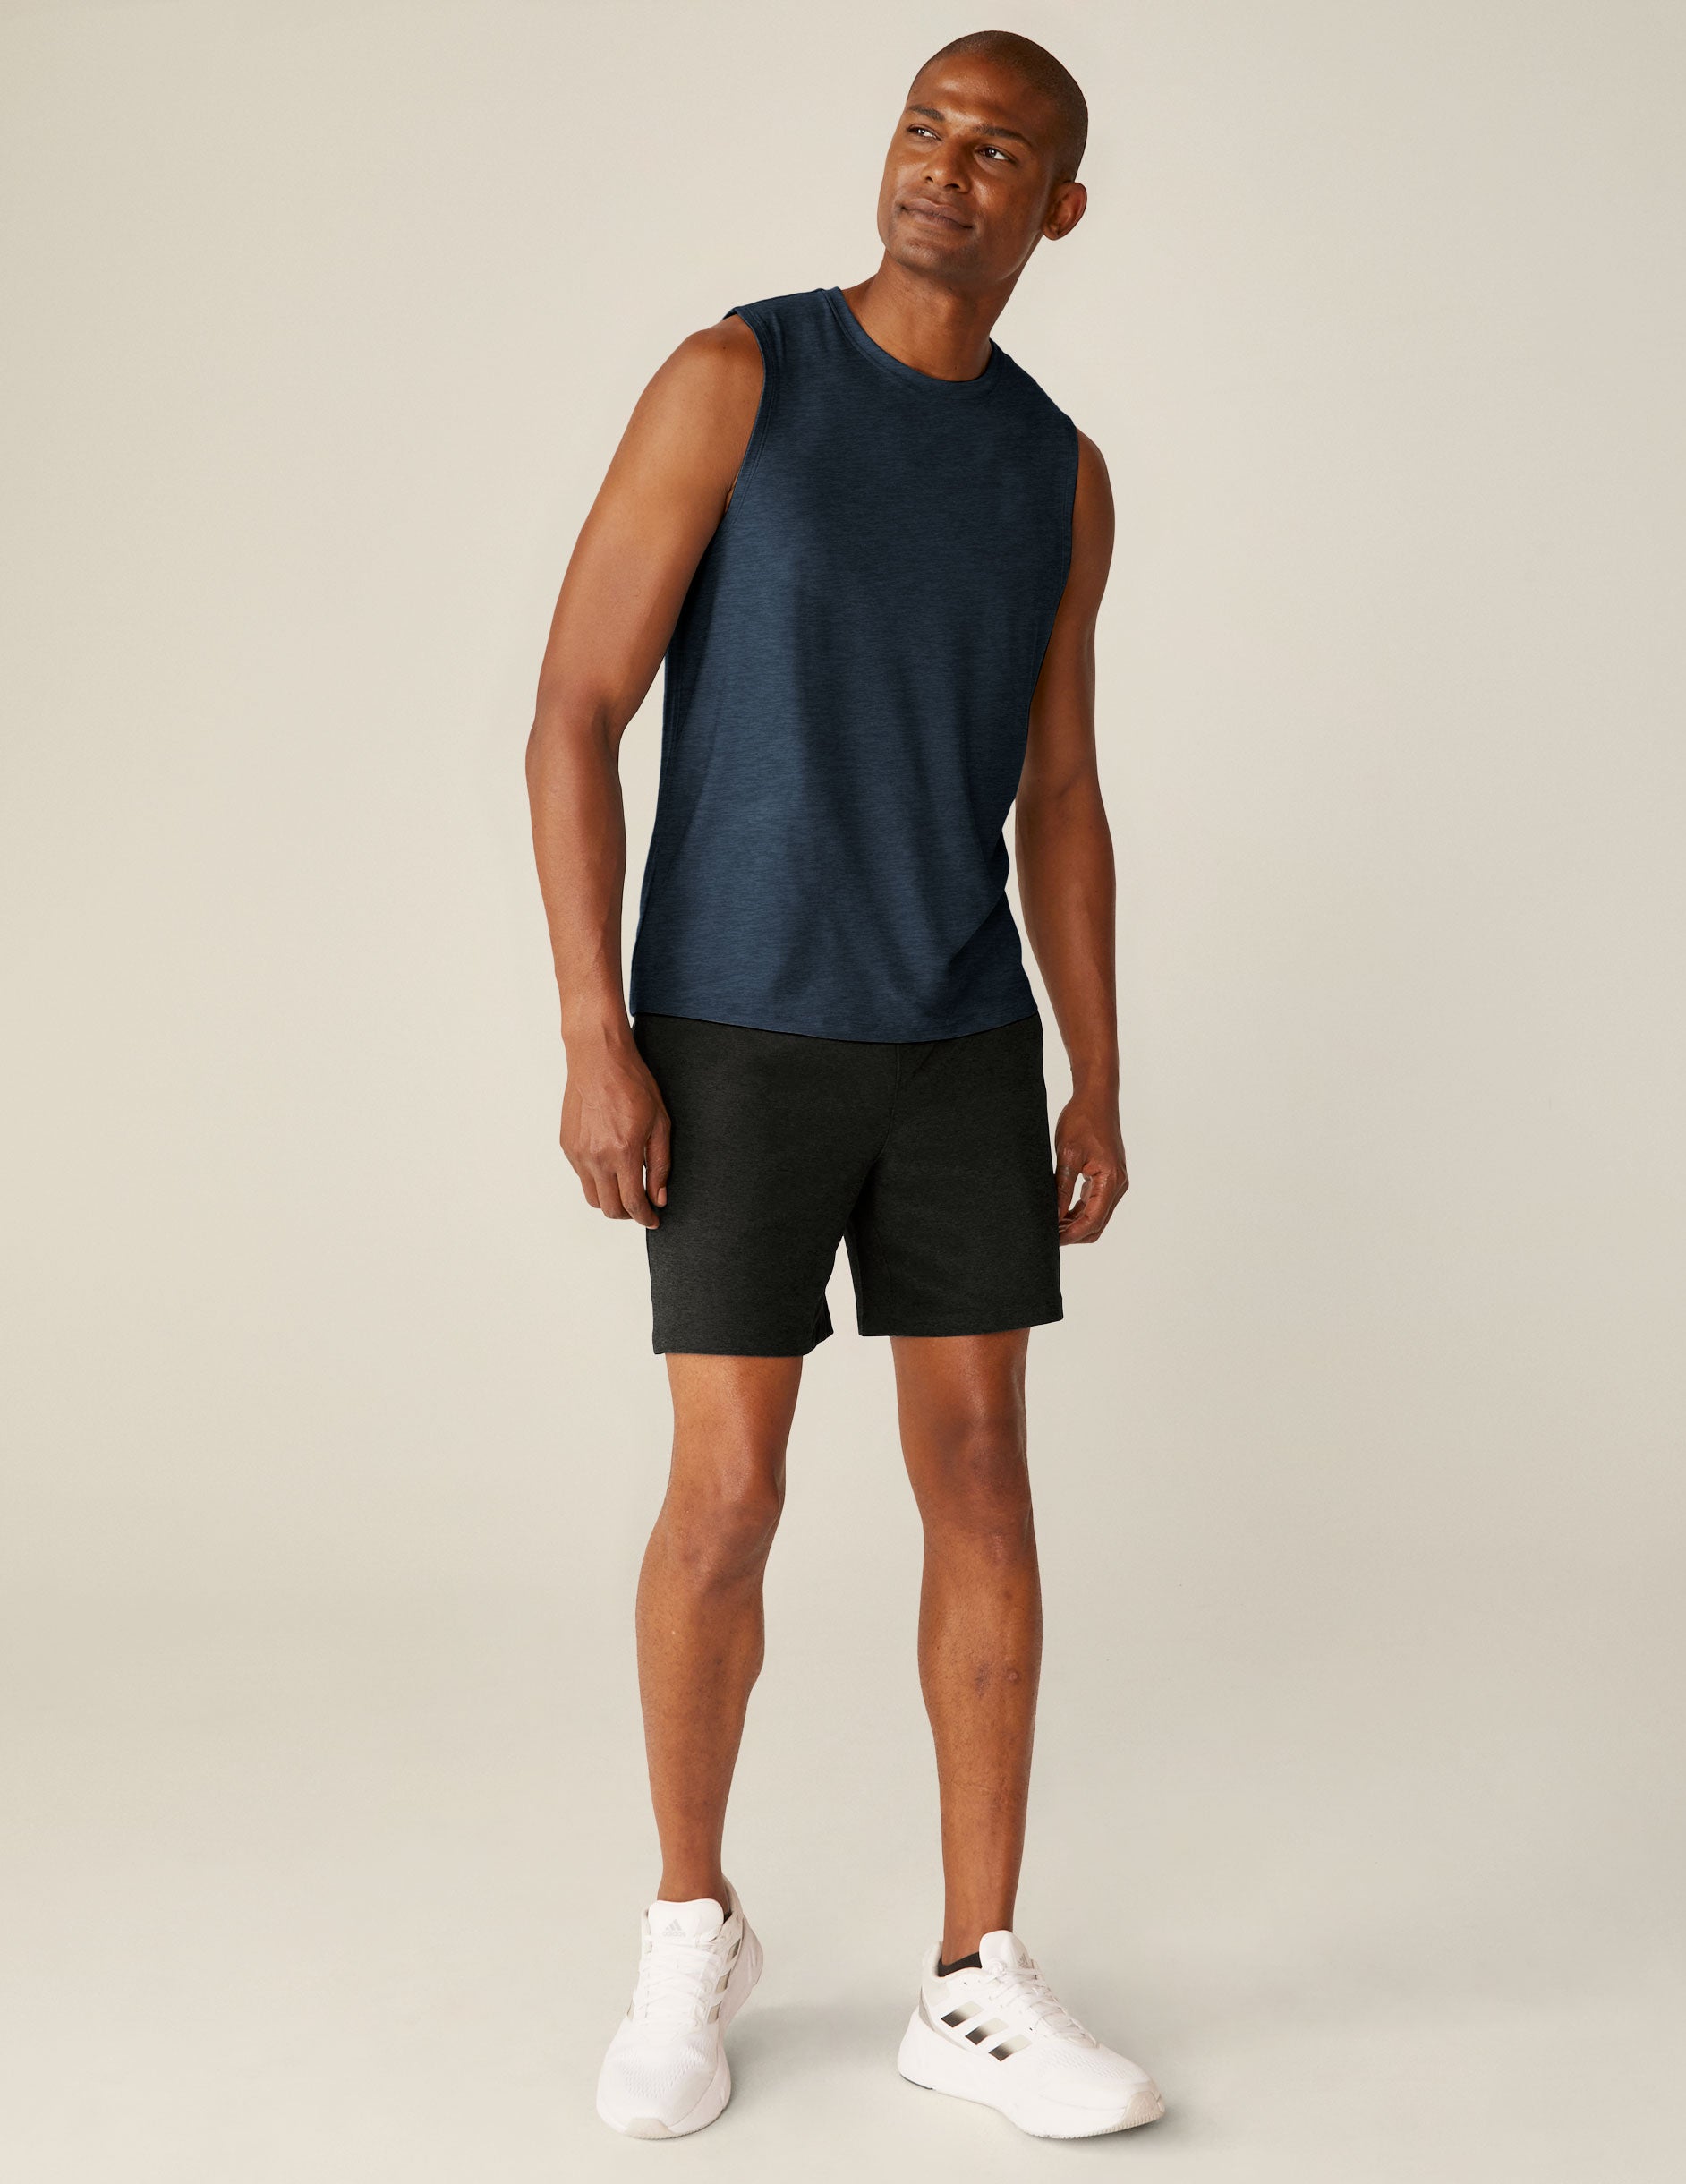 black relaxed fit men's athleisure shorts with pockets. 